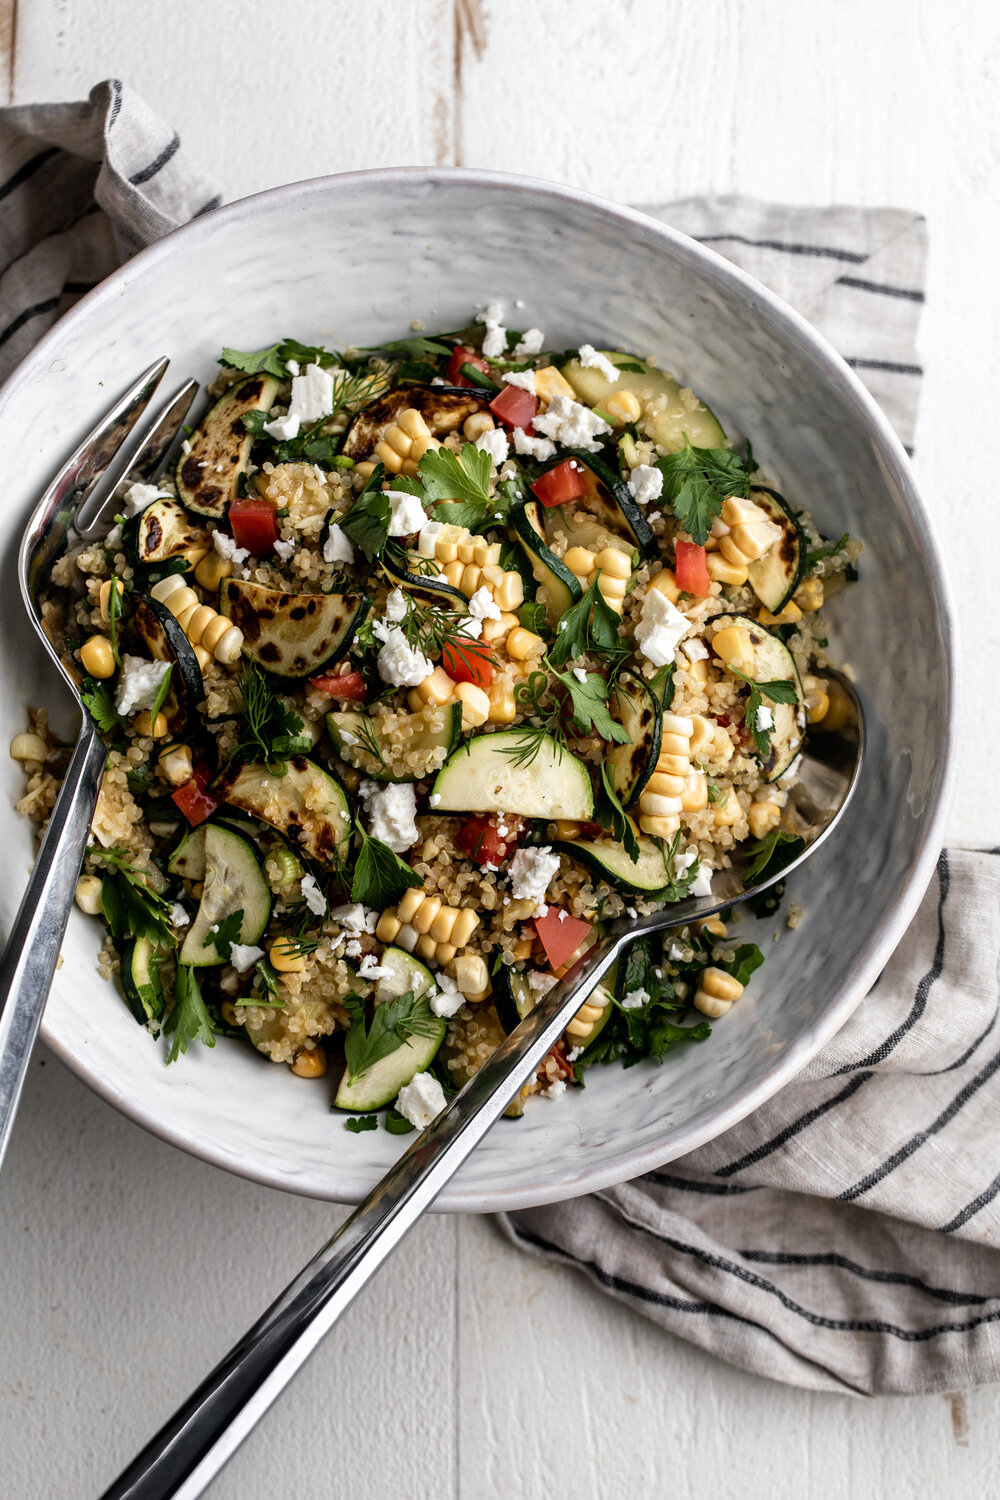 This summer quinoa salad recipe is packed with seasonal ingredients like zucchini, corn, tomatoes in this vegetarian dish.